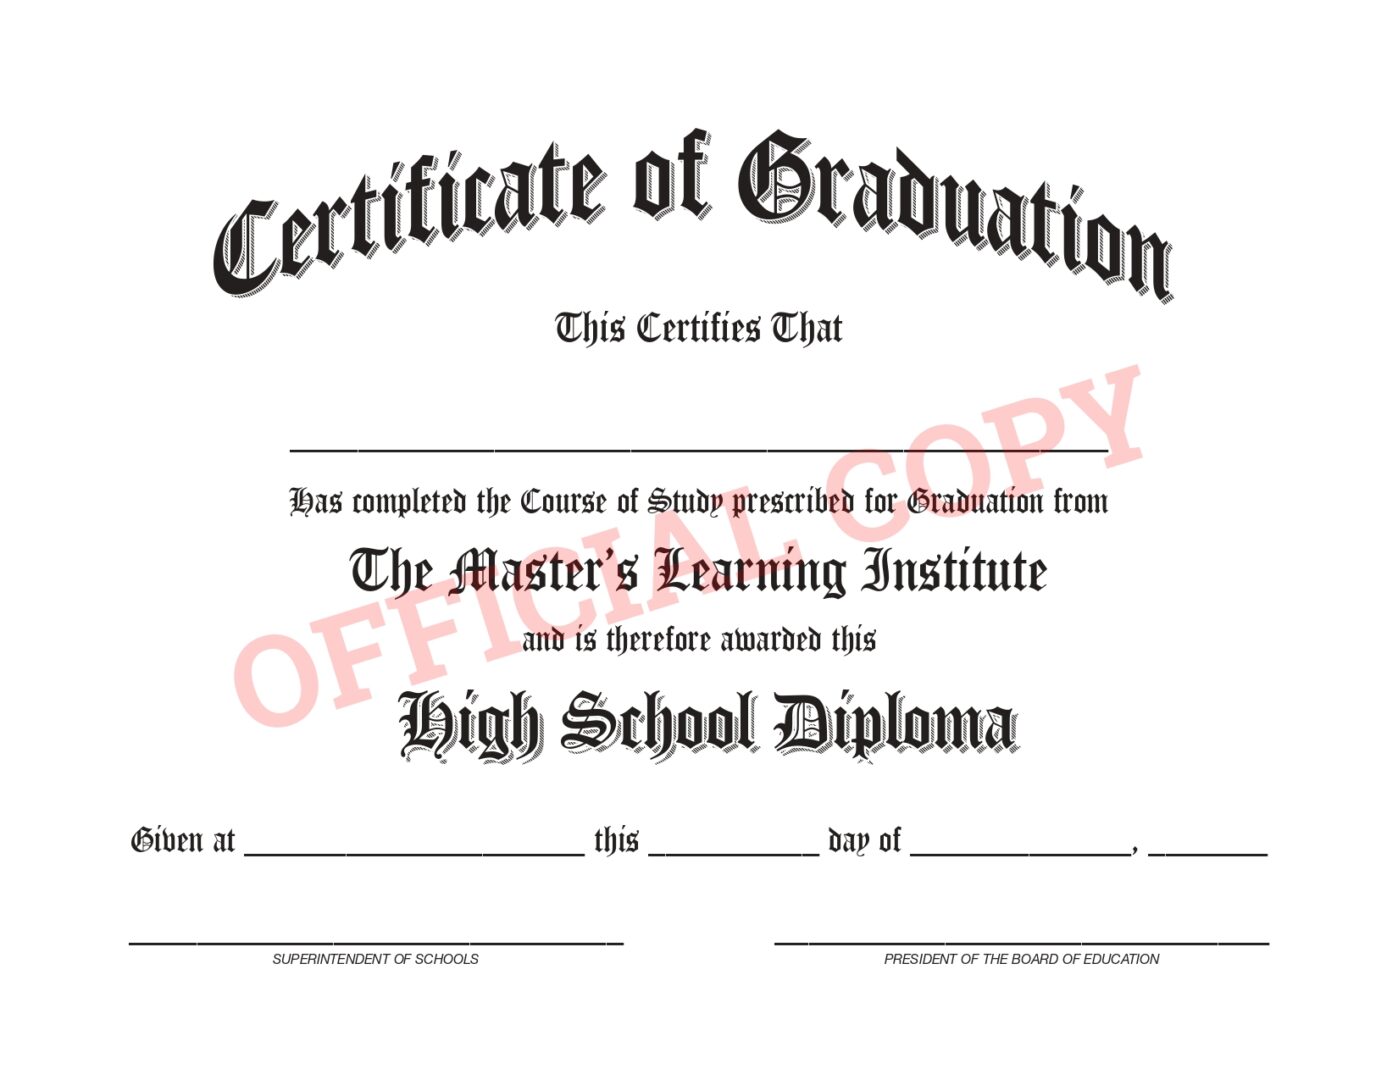 A certificate of graduation for an high school diploma.